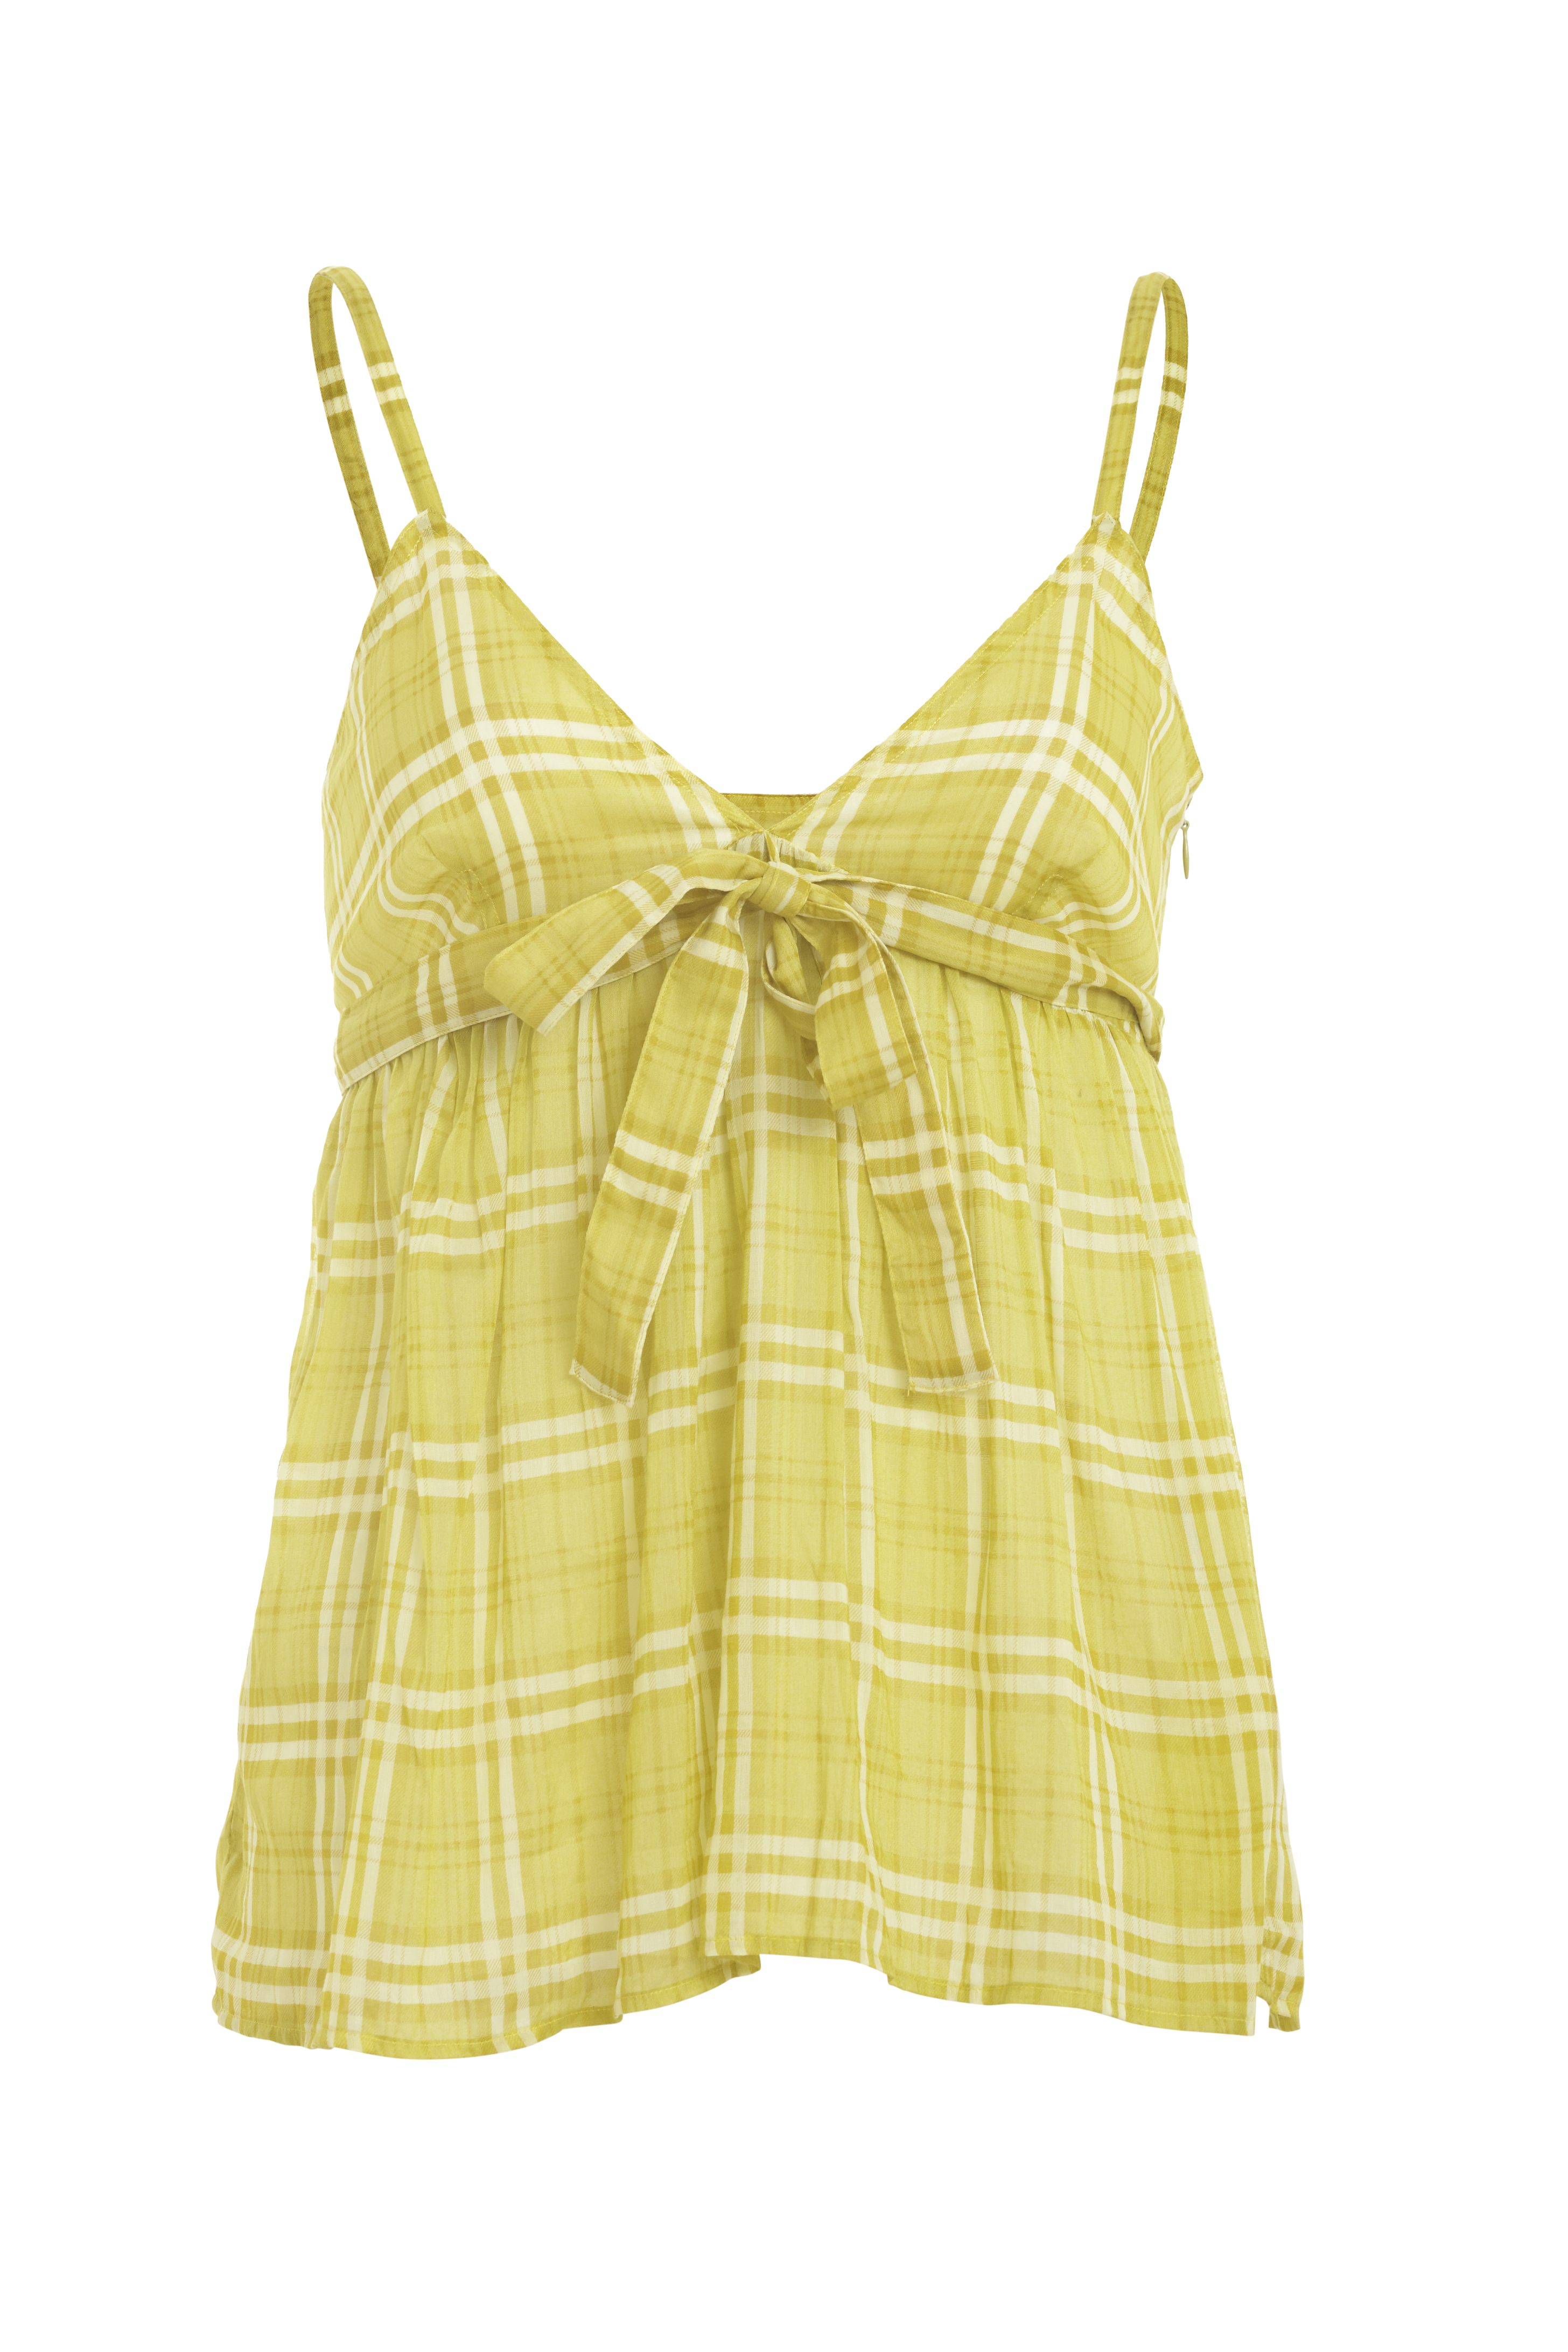 Burberry lime green plaid summer top | Curate8